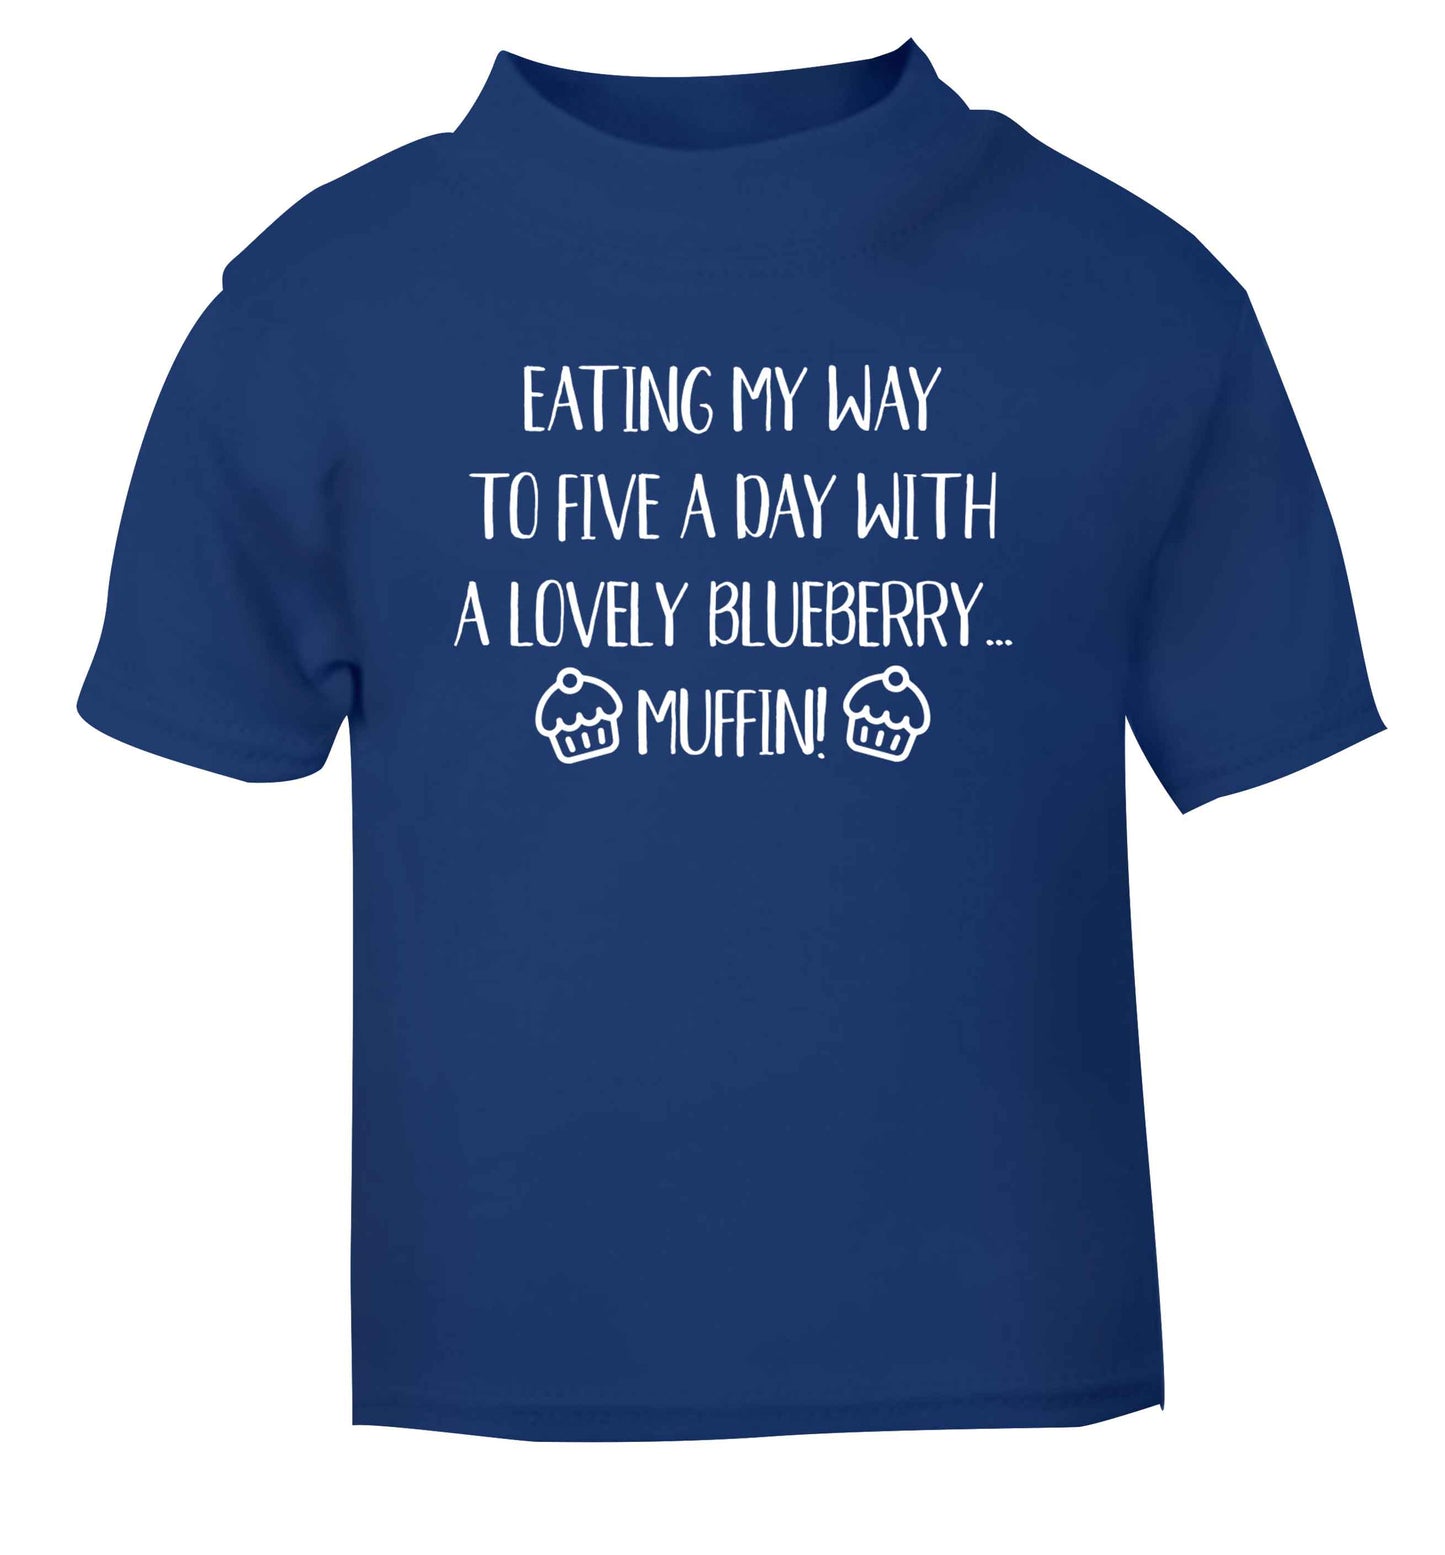 Eating my way to five a day with a lovely blueberry muffin blue Baby Toddler Tshirt 2 Years